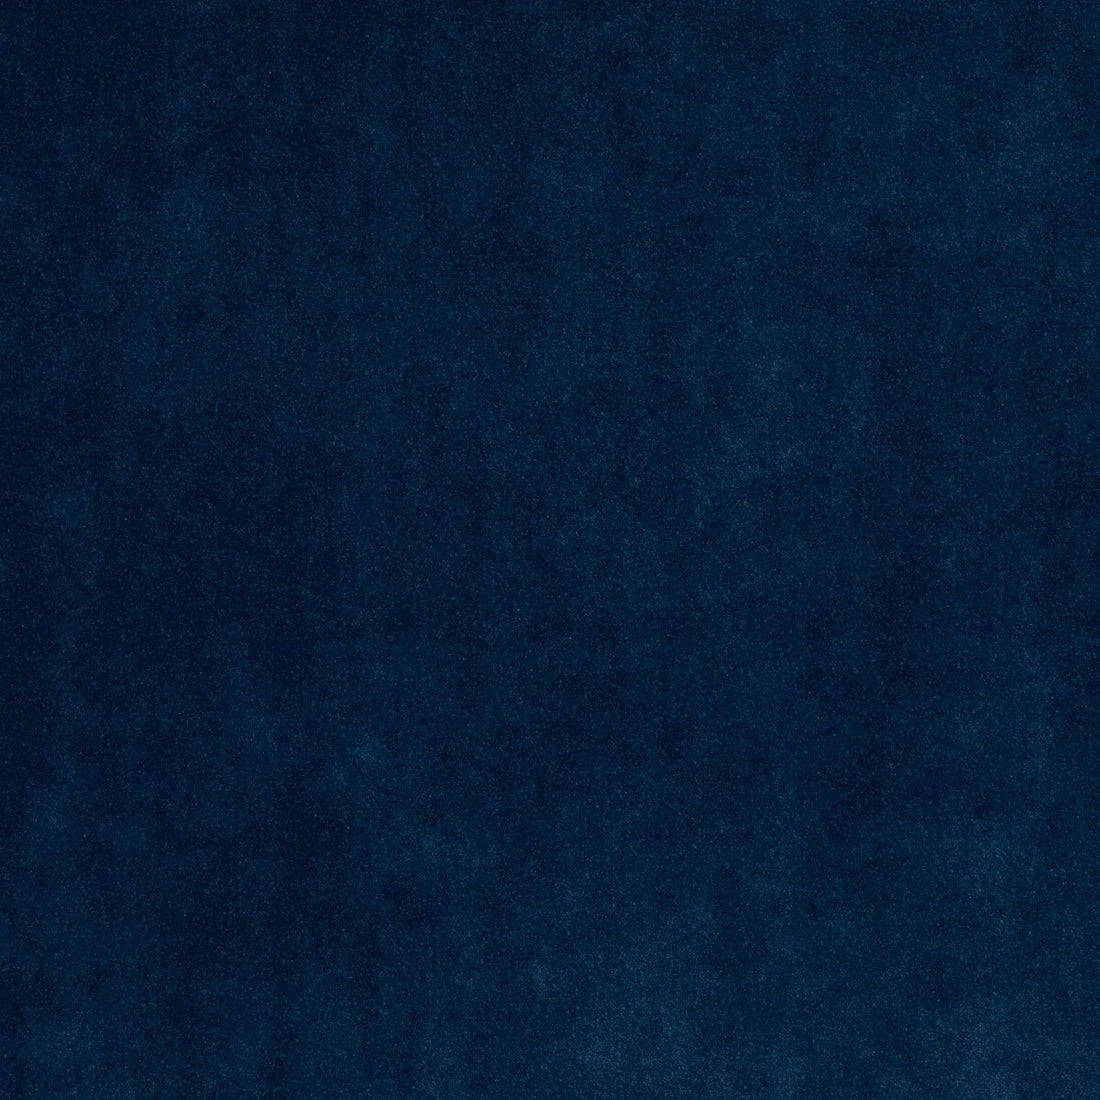 Riviera Velvet fabric in royal blue color - pattern BF10841.665.0 - by G P &amp; J Baker in the Riviera Velvet collection